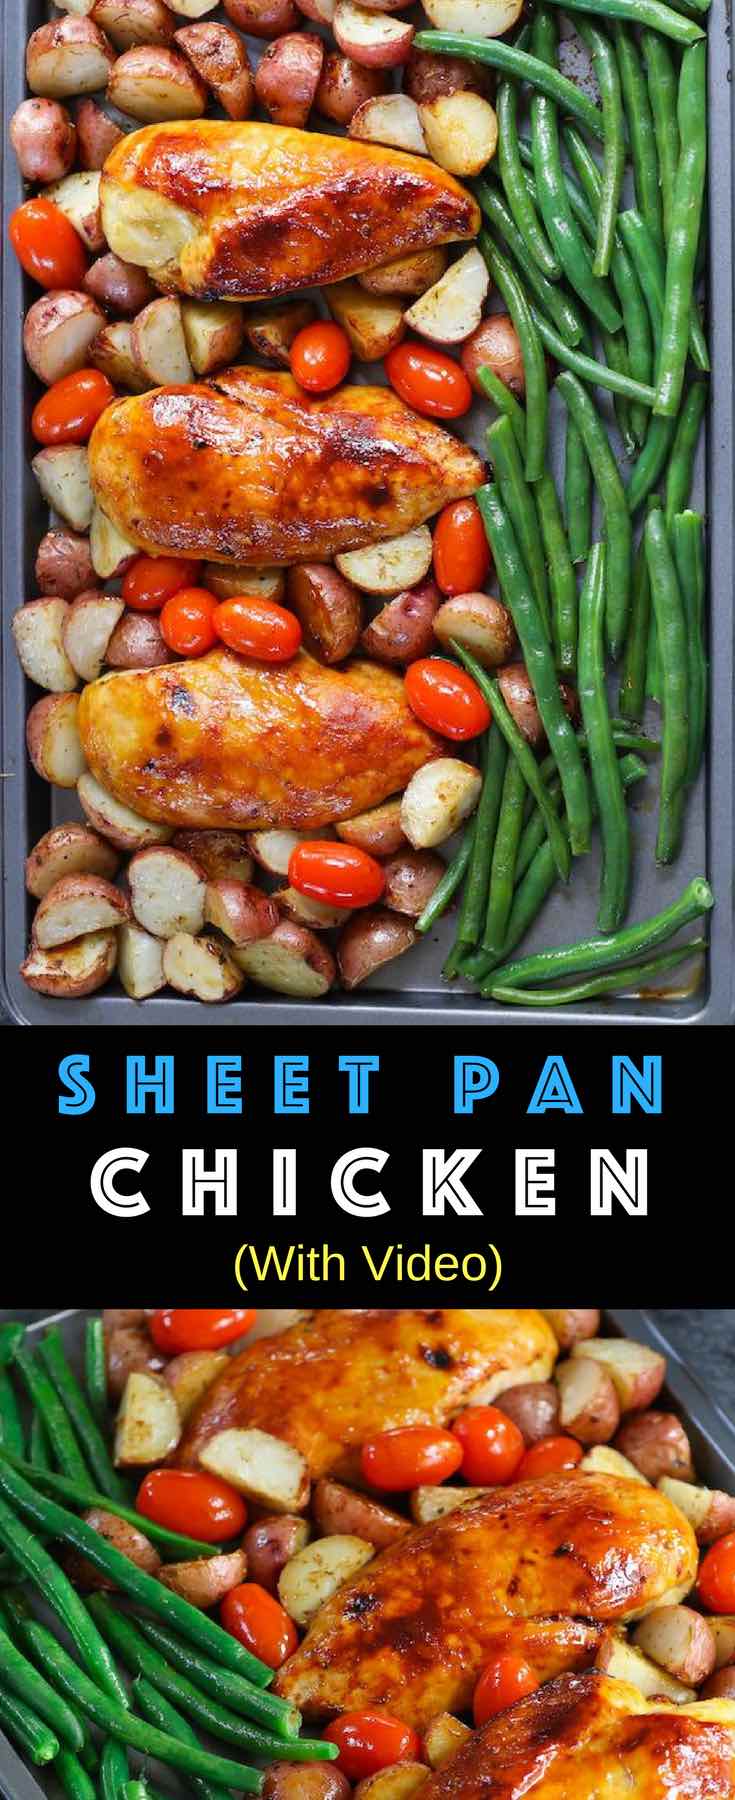 One Pan Baked Chicken With Potatoes, Green Beans and Cherry Tomatoes - Tender and juicy chicken breasts baked with vegetables in a sheet pan. A quick and healthy dinner that's super easy to make. It takes only about 30 minutes. Quick and Easy Dinner, healthy, Sheet Pan recipe. Video recipe. | Tipbuzz.com #BakedChicken #SheetpanChicken